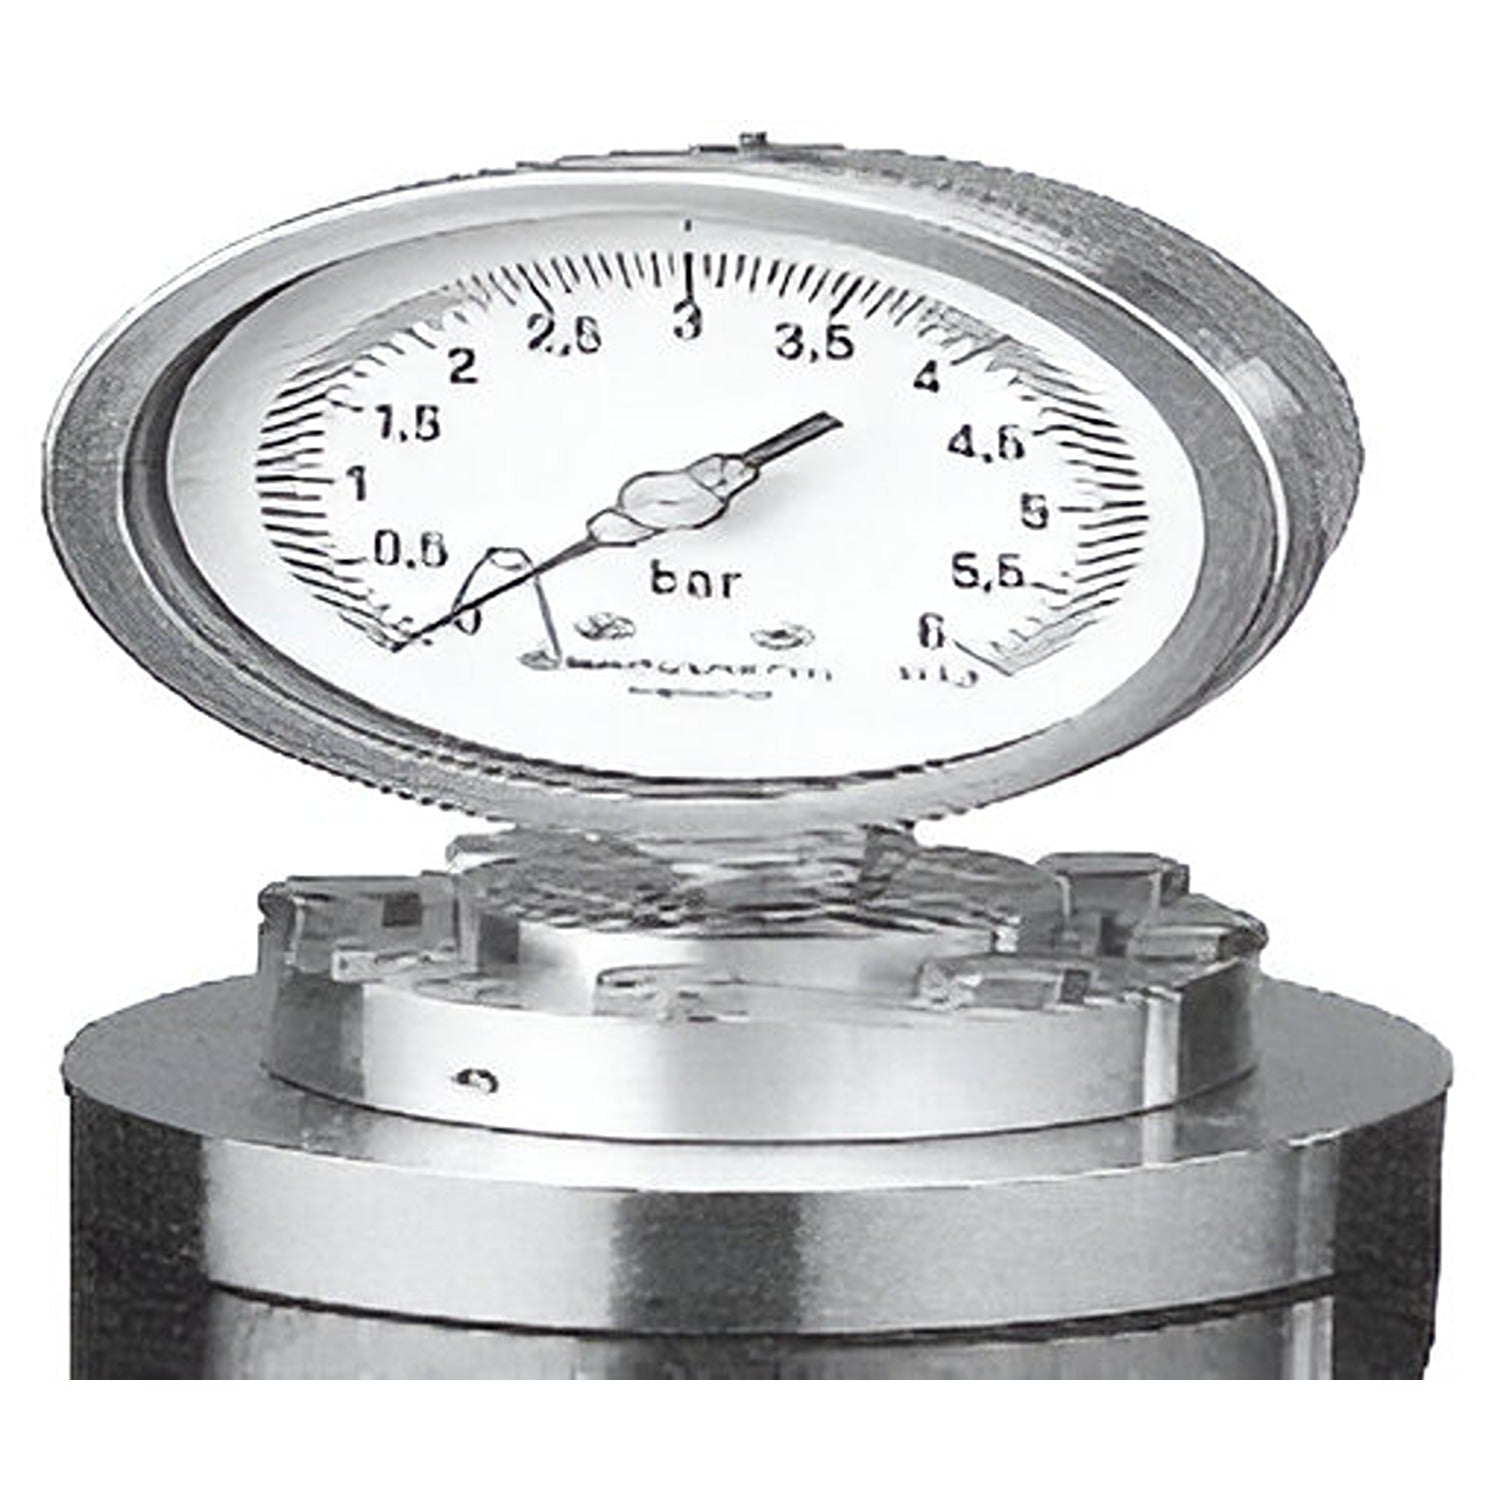 YEW AIK AK 00091 Pressure Gauge Back Connection Liquid Filled - Premium Pressure Gauge from YEW AIK - Shop now at Yew Aik.